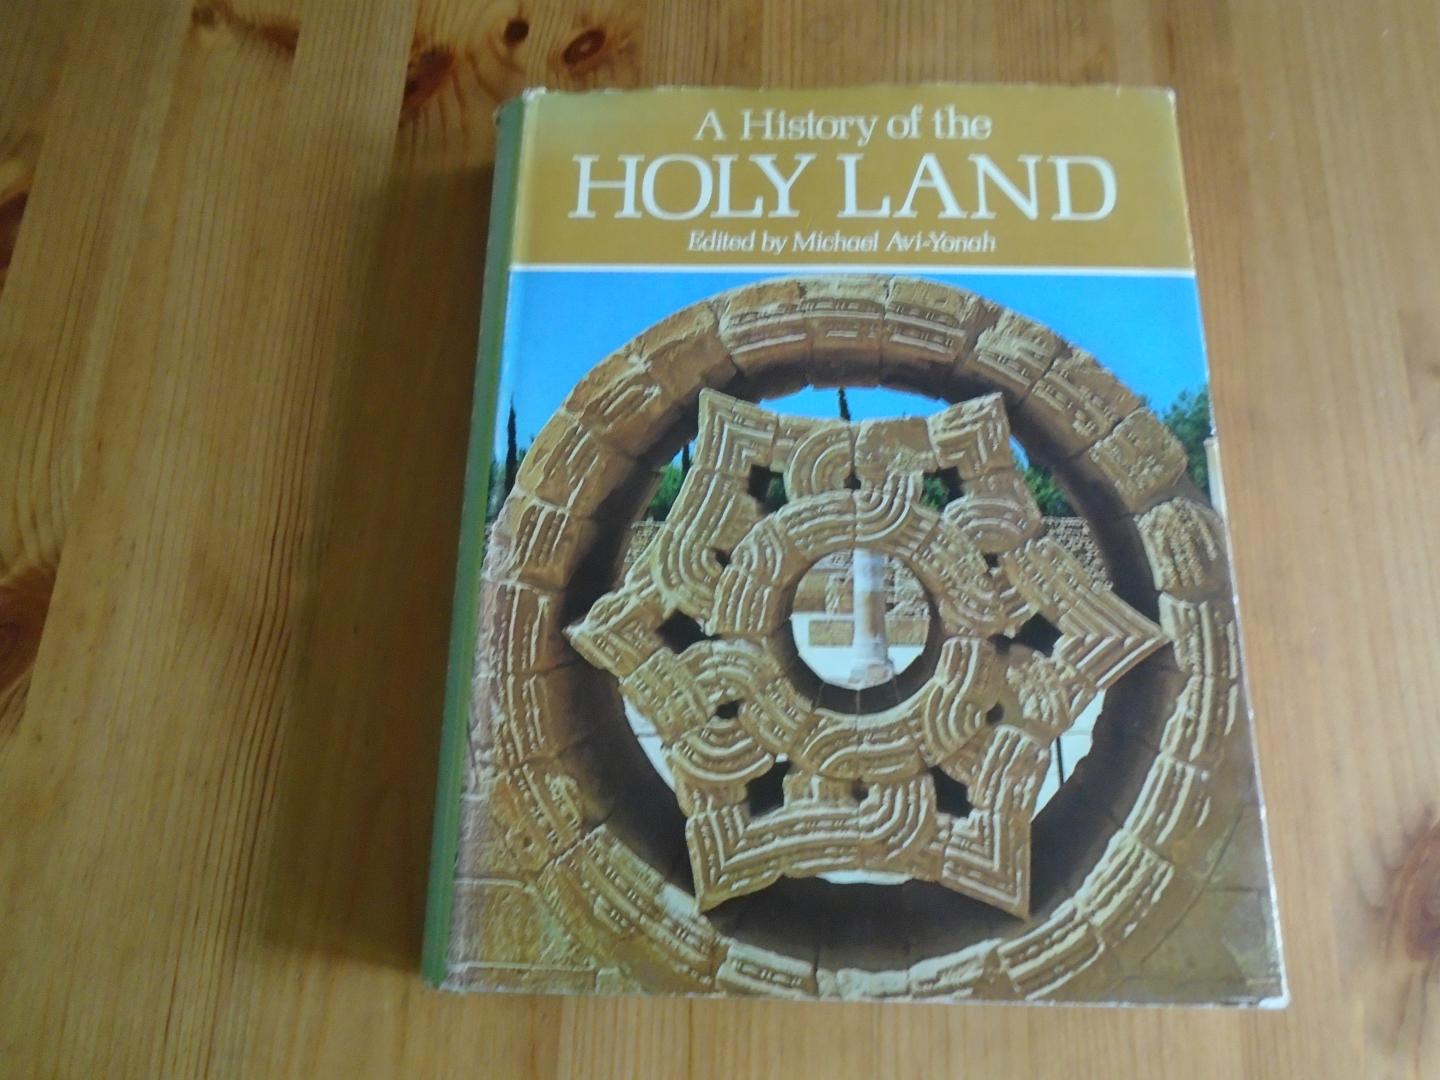 Avi-Yonah, Michael - A History of the Holy Land